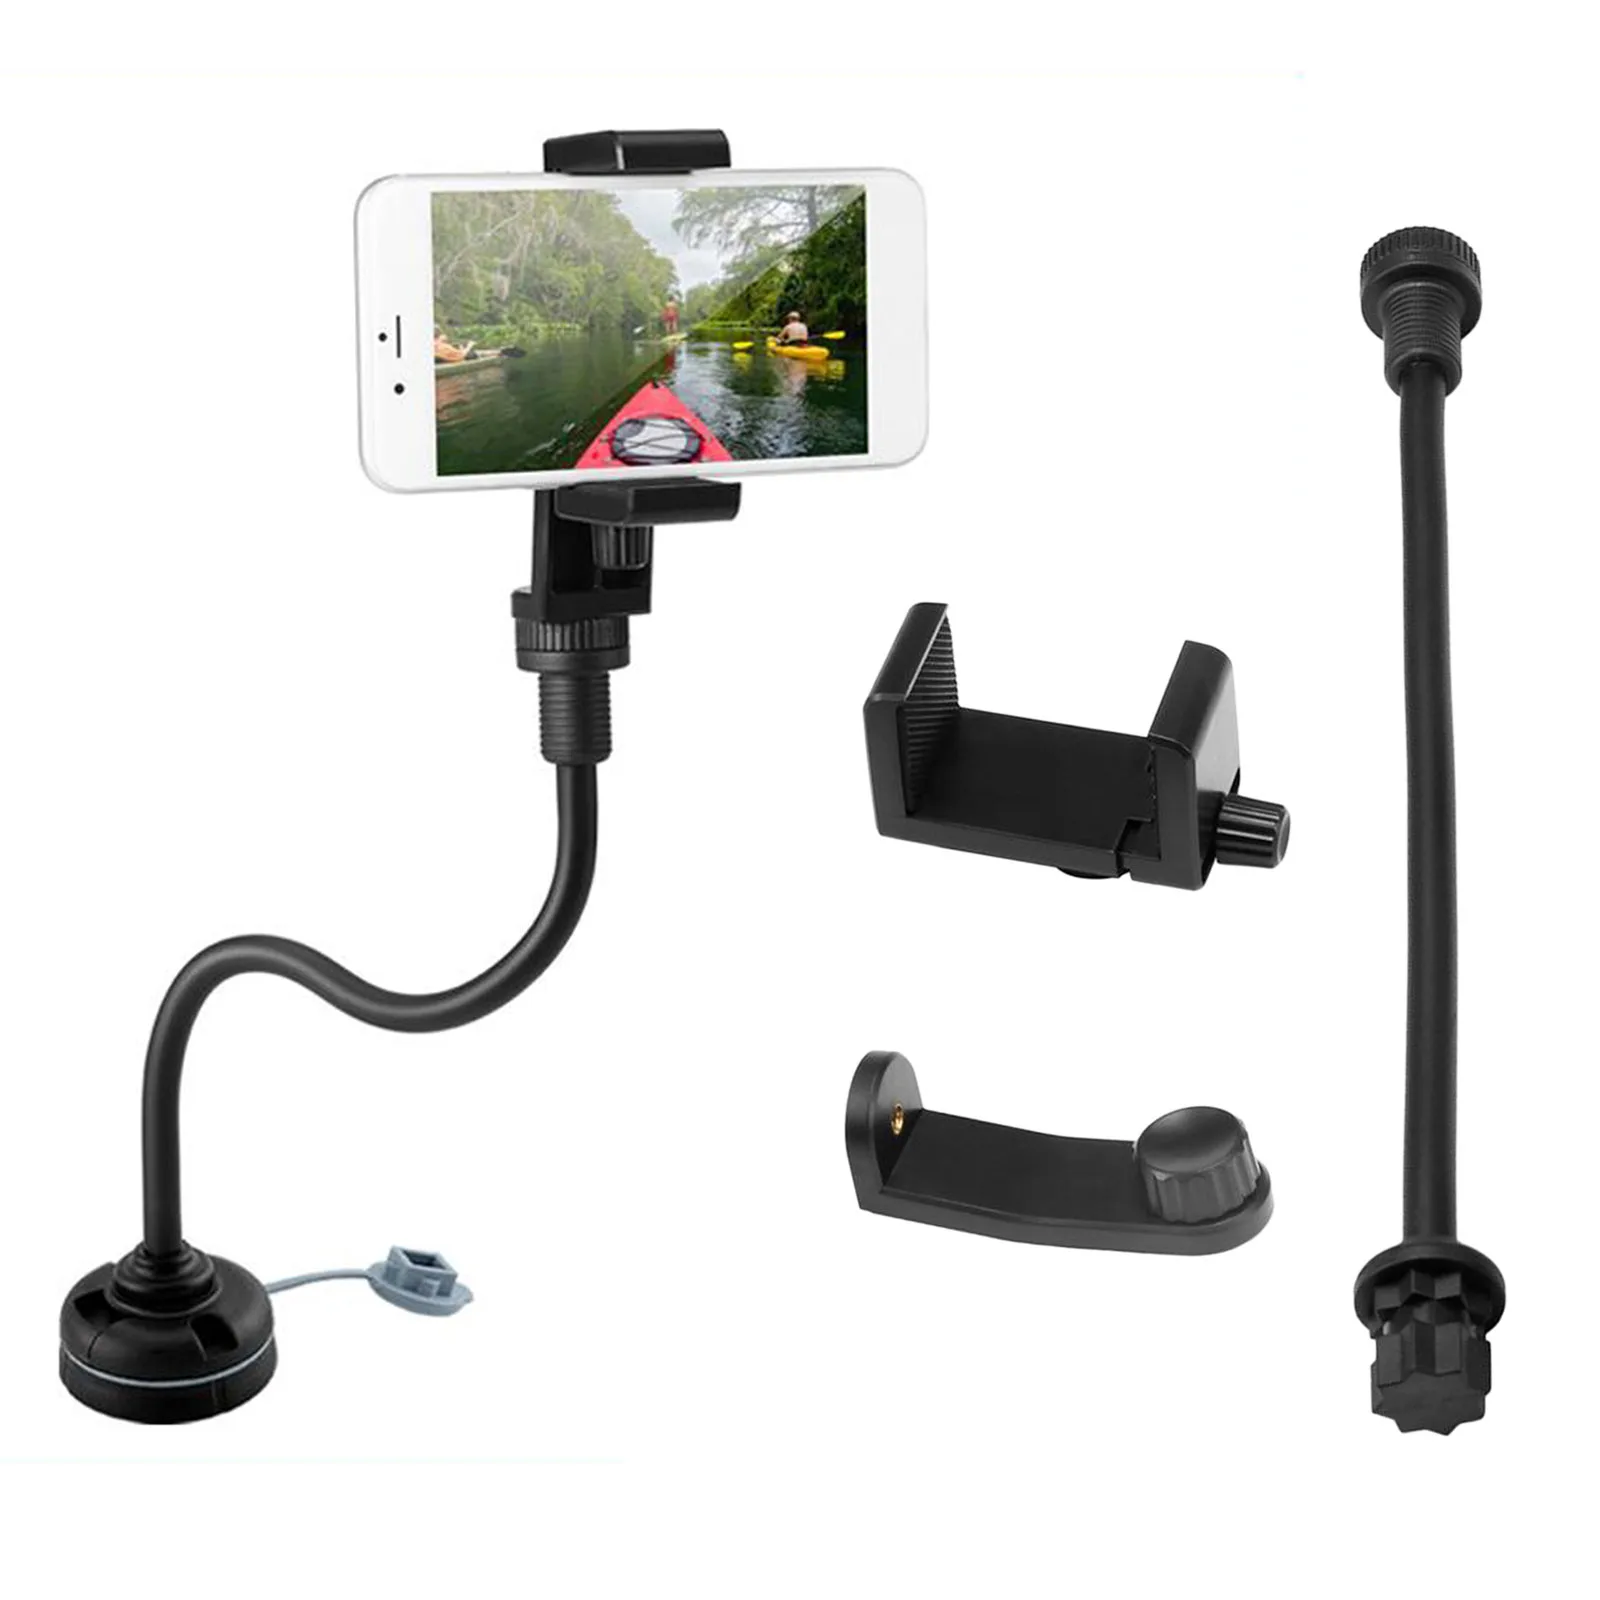 300mm Long Arm Kayak Dinghy Mobile Phone Mount Clamp Holder Fit 2.0-3.5` Width Phones Water Sports Accessories